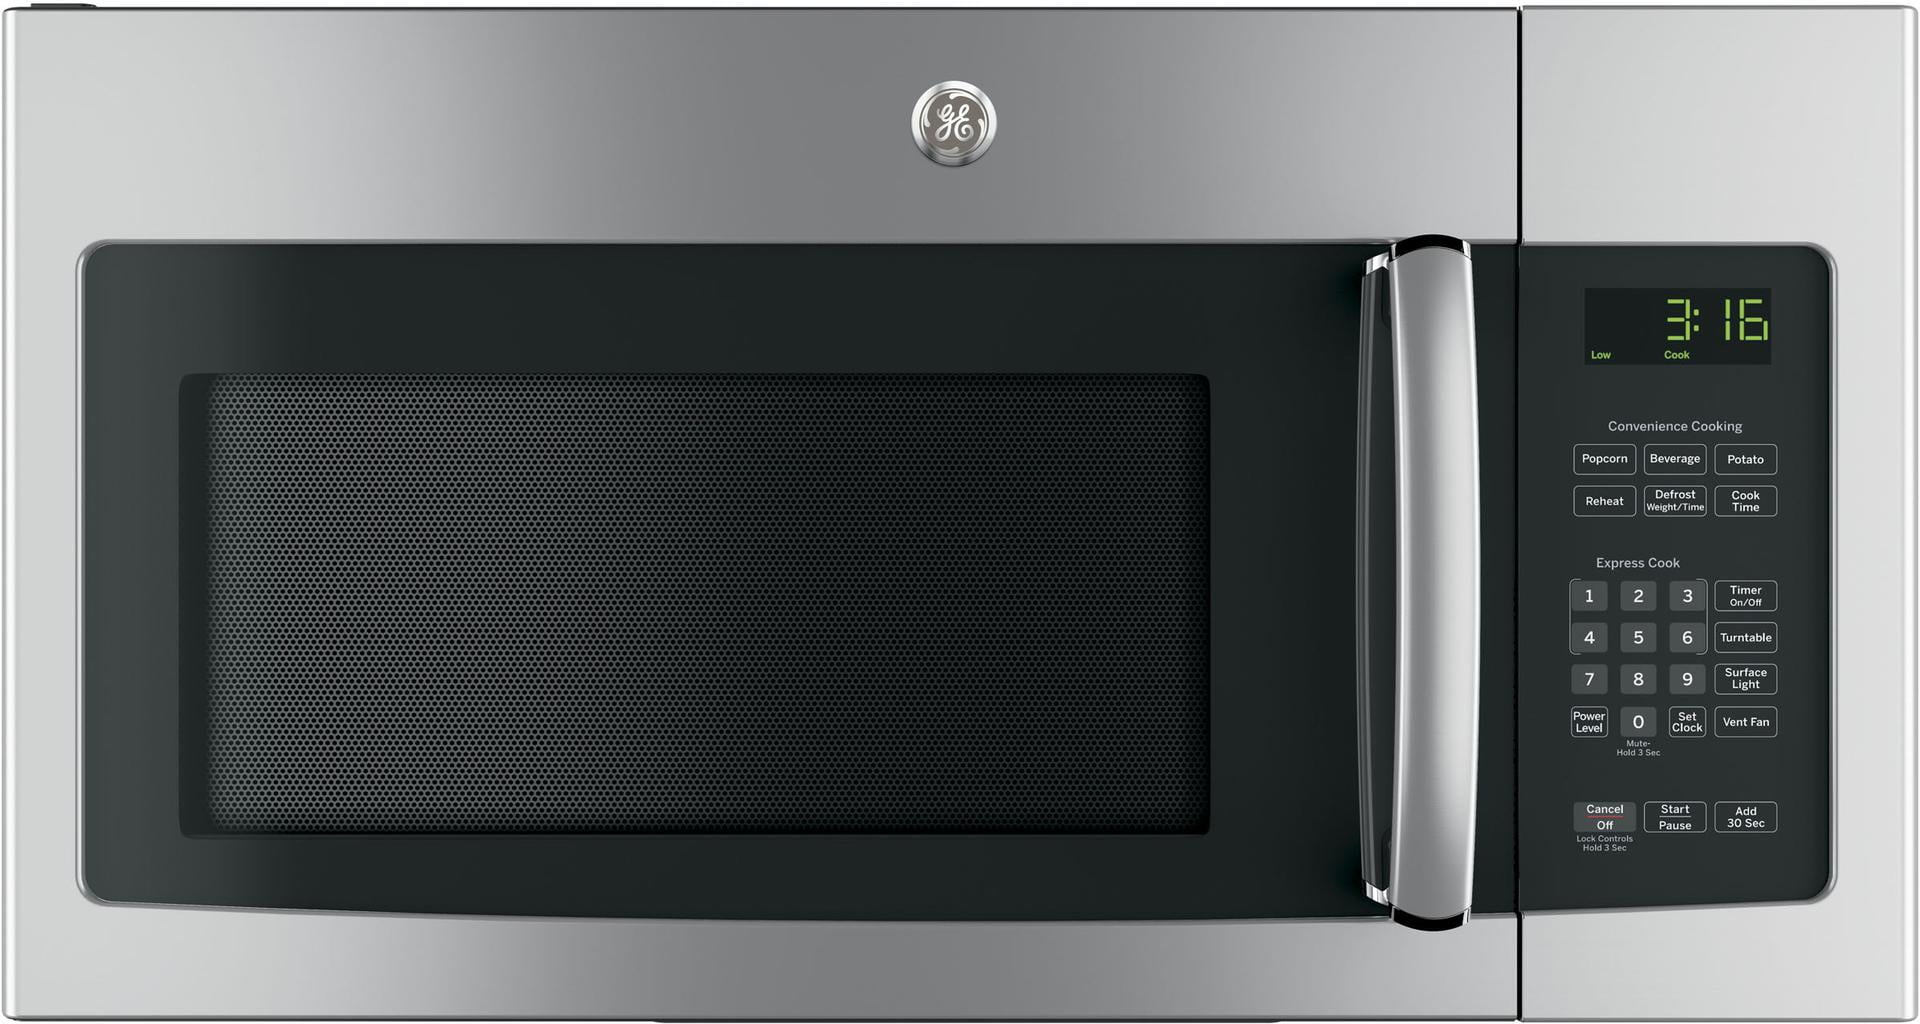 JVM3162RJSS 30 Over-the-Range Microwave with 1.6 cu. ft. Capacity 300